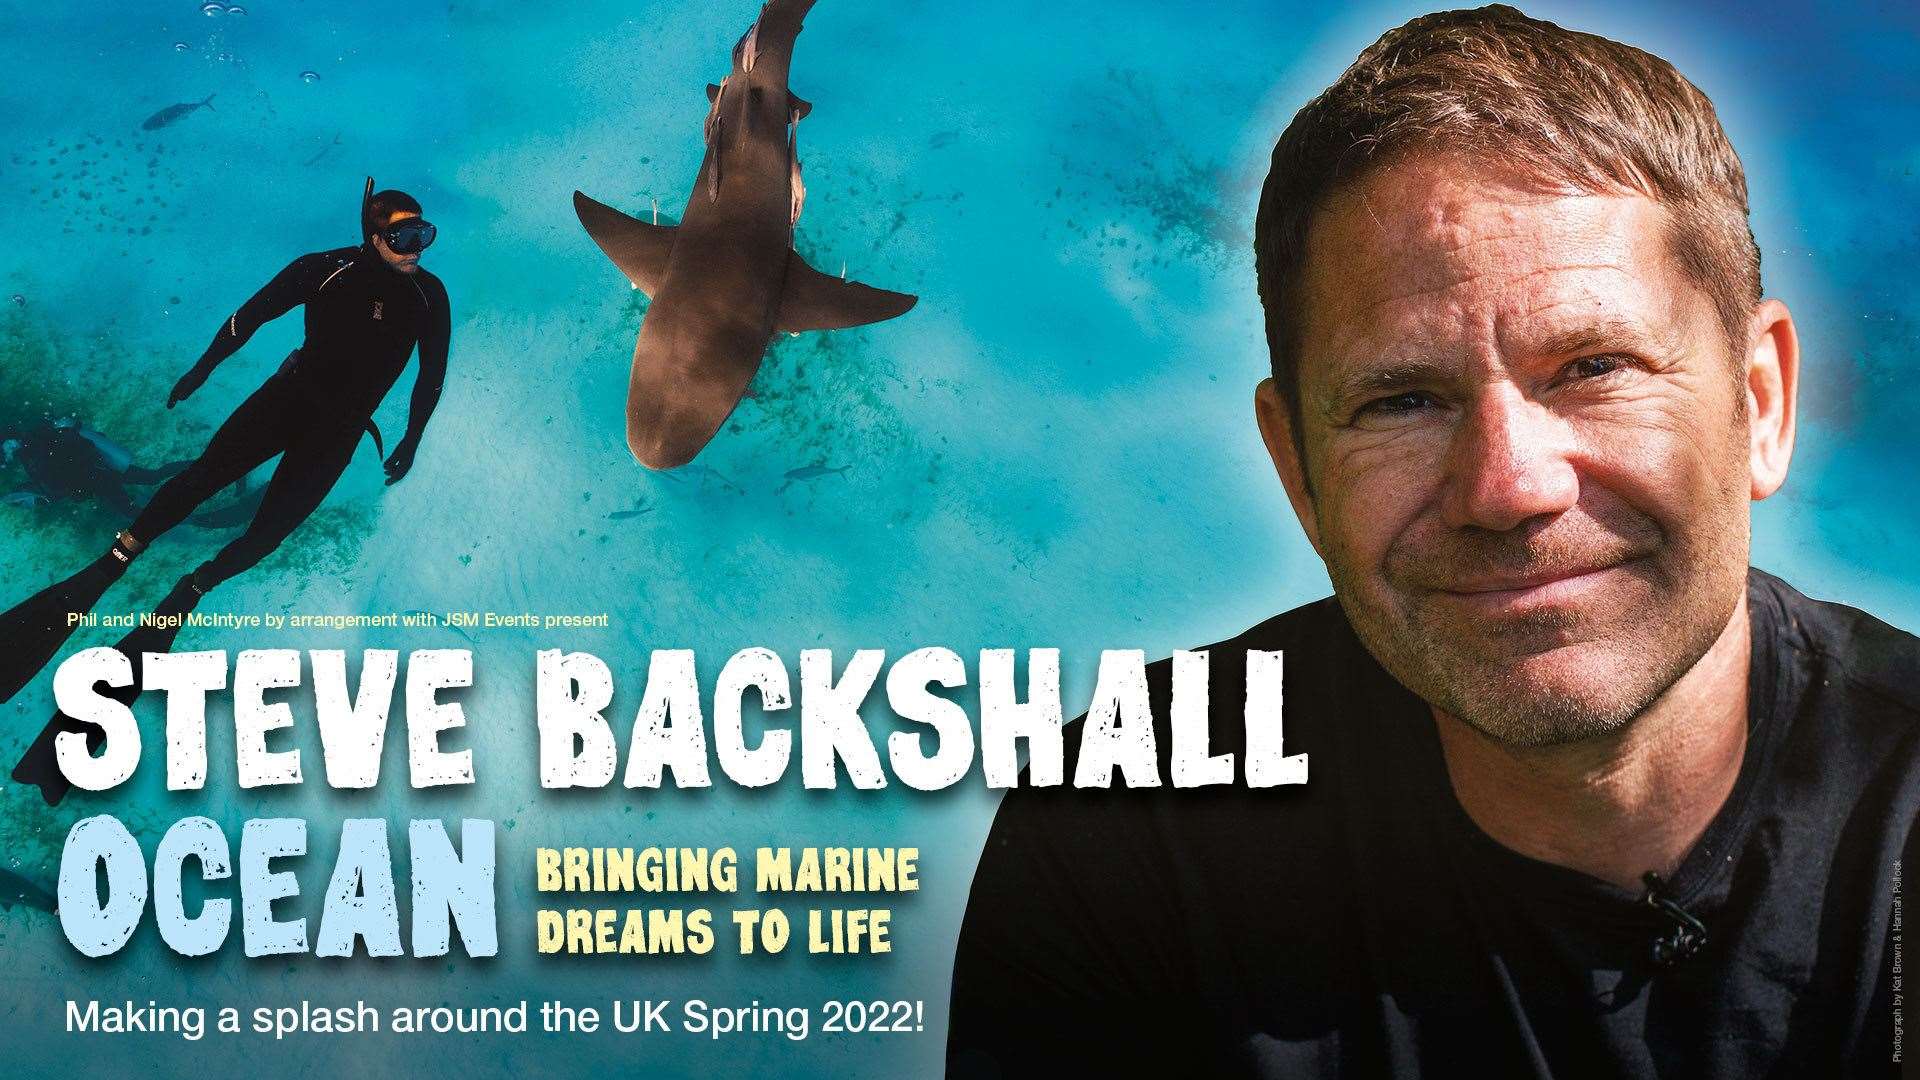 Wildlife presenter Steve Backshall is set to come to the Music Hall next spring.